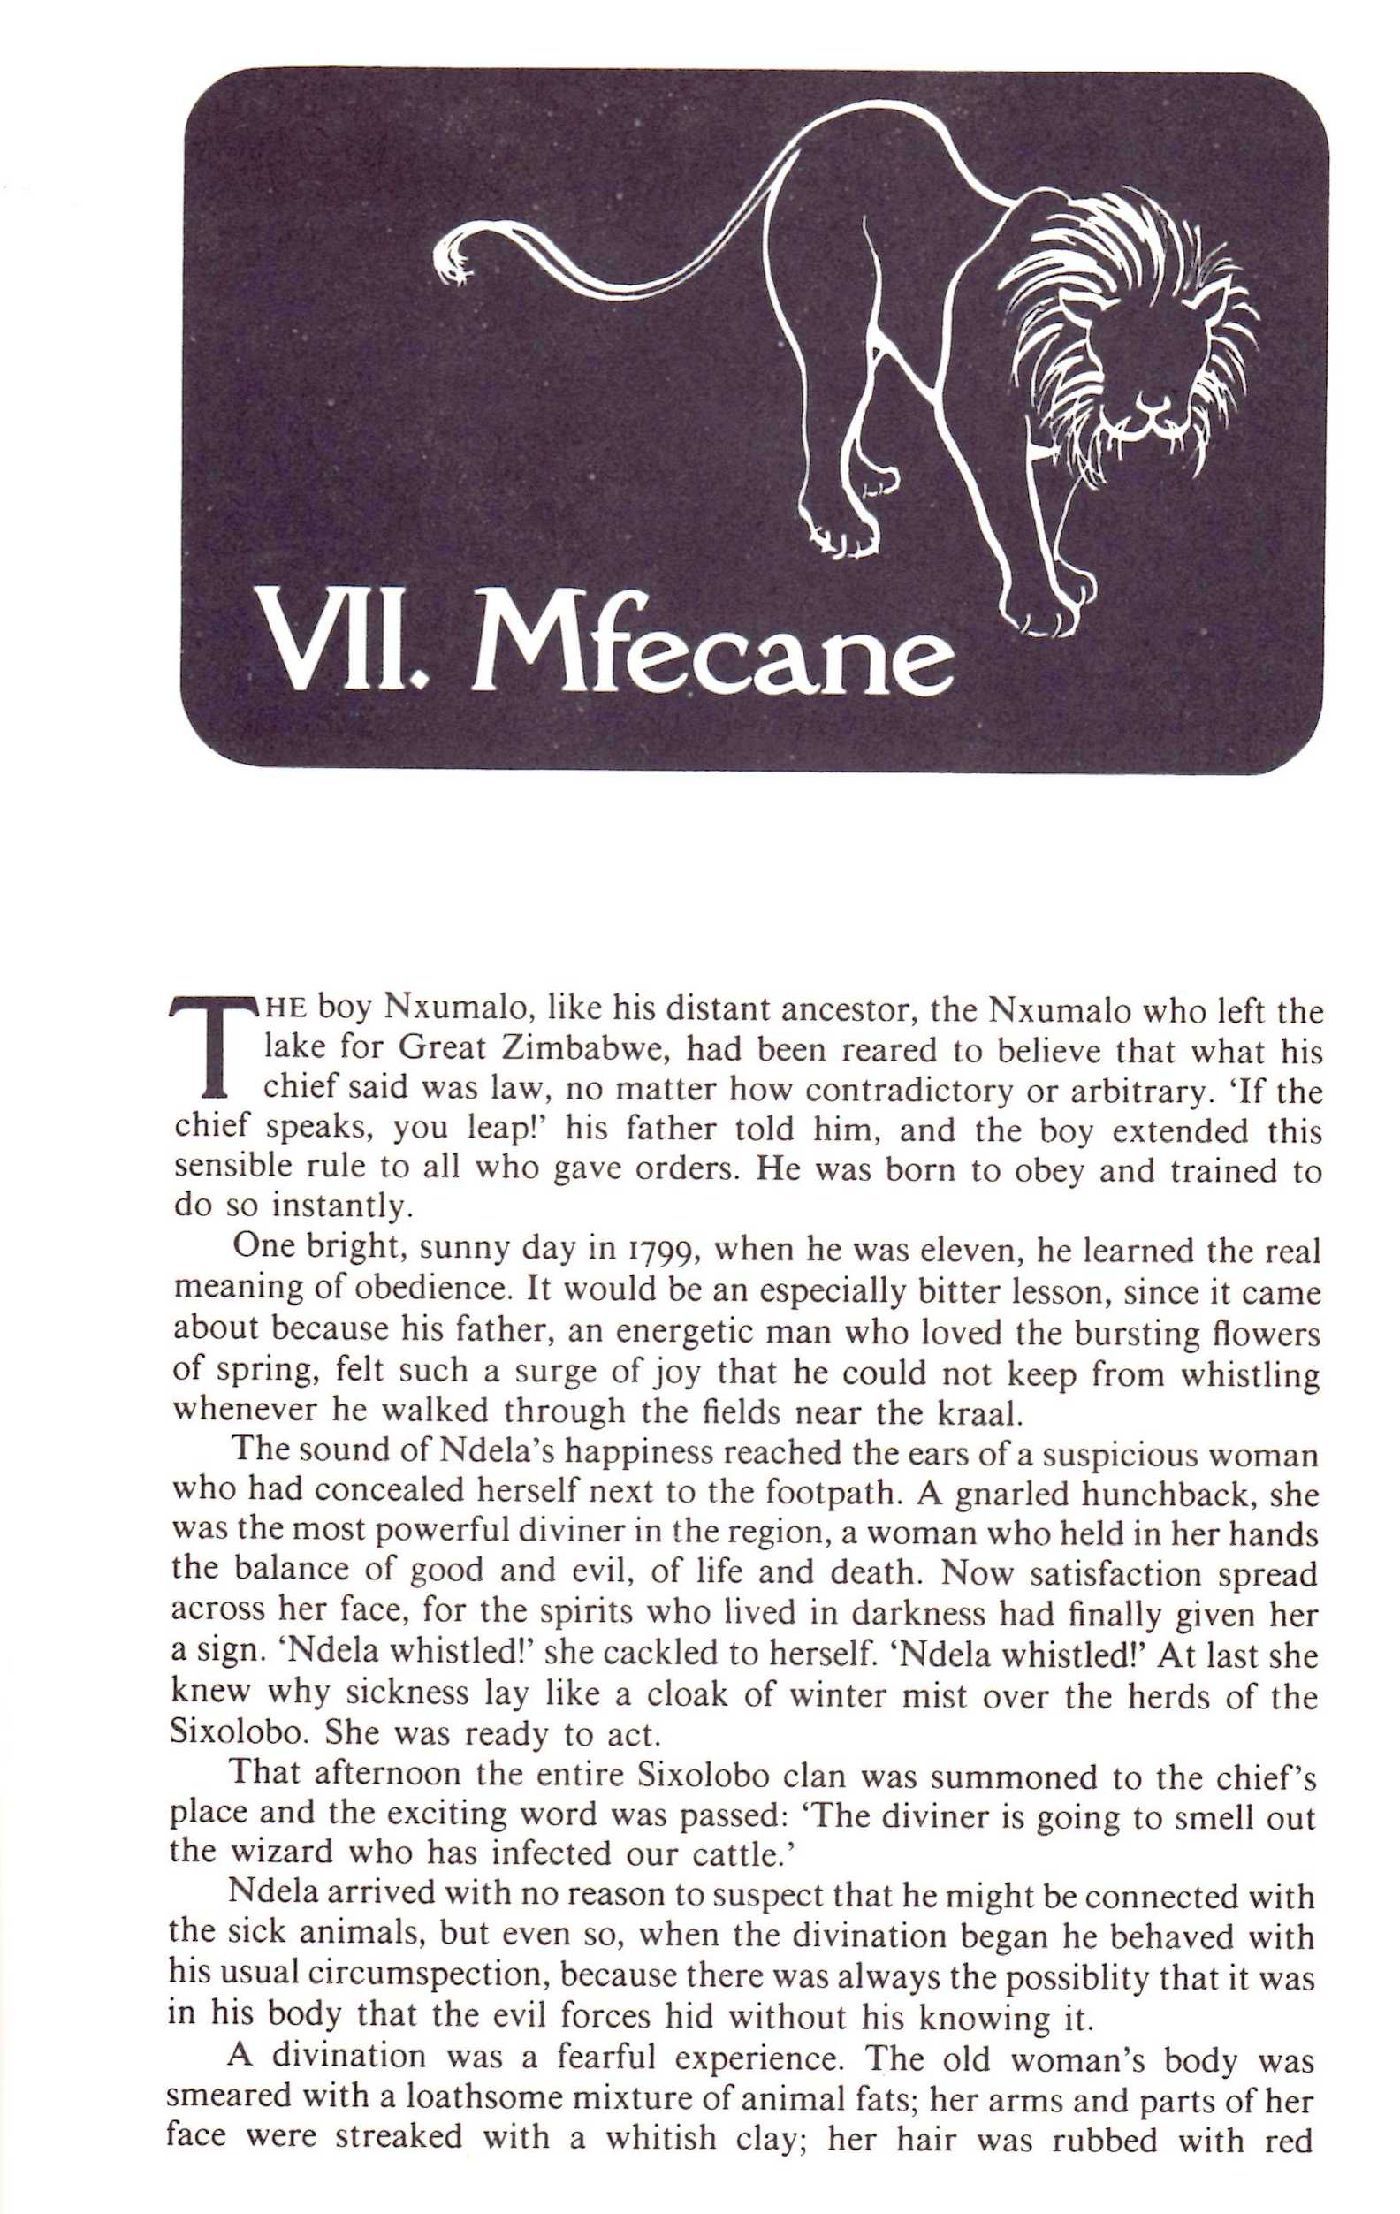 Excerpt from Mfecane chapter, The Covenant | James A Michener 1